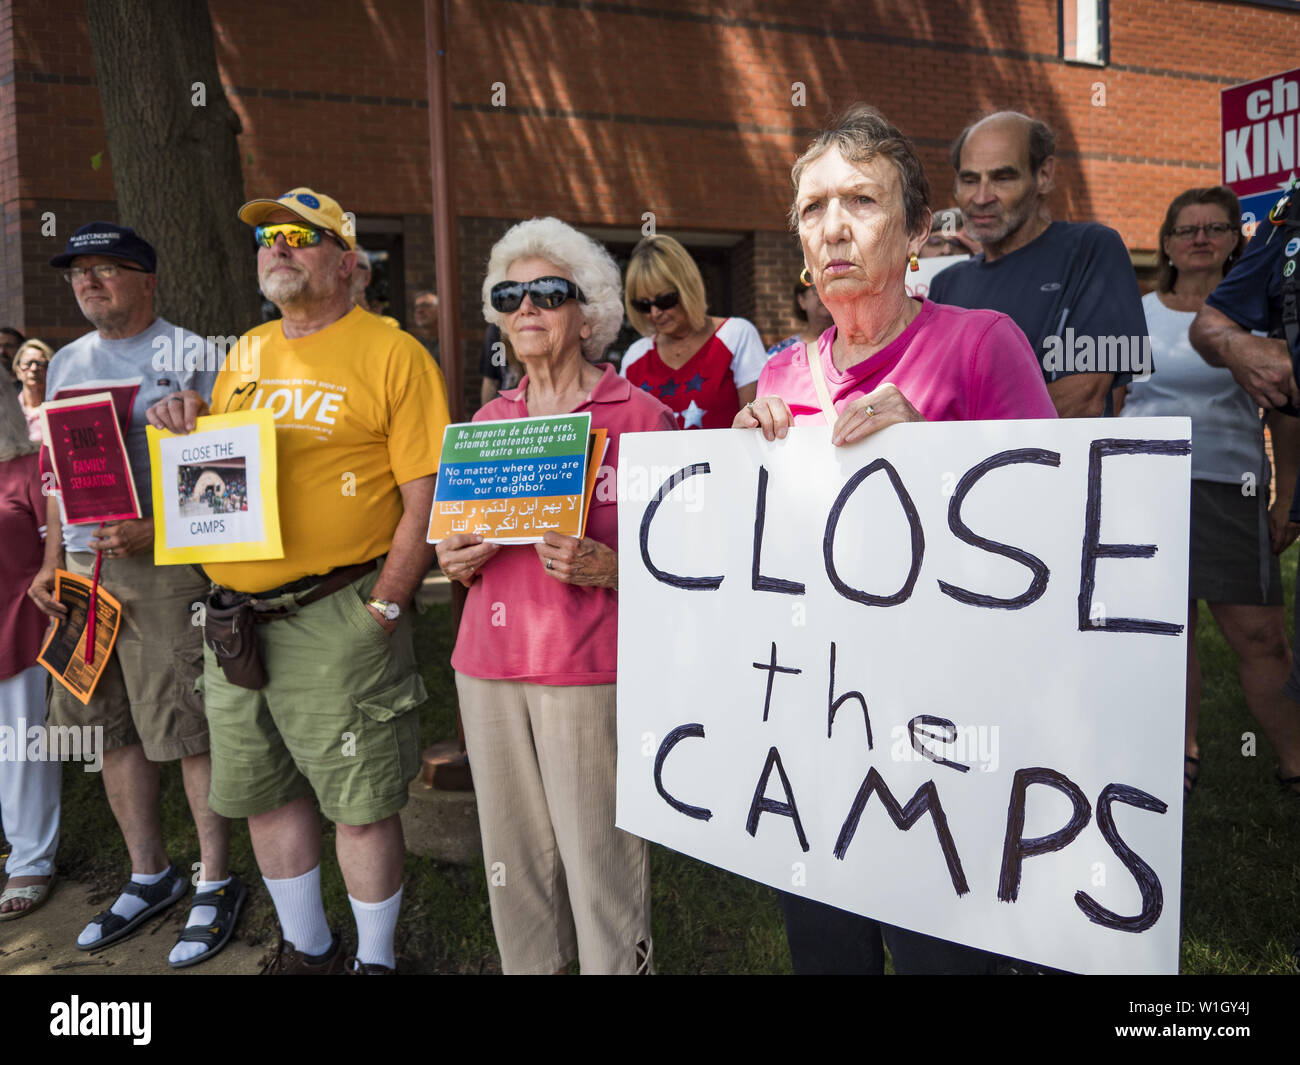 July 2, 2019 - Des Moines, Iowa, U.S - People gather outside of Rep. Cindy Axne's (D-IA) office in Des Moines. About 150 people came to Congresswoman Axne's office Tuesday to protest the treatment of migrant children detained by the US Border Patrol along the US/Mexico border. Axne was not in the office, but a member of Axne's staff took notes and promised to pass people's concerns on to the Congresswoman. Similar protests were held at other congressional offices and Immigration and Customs Enforcement (ICE) detention facilities across the country. (Credit Image: © Jack Kurtz/ZUMA Wire) Stock Photo